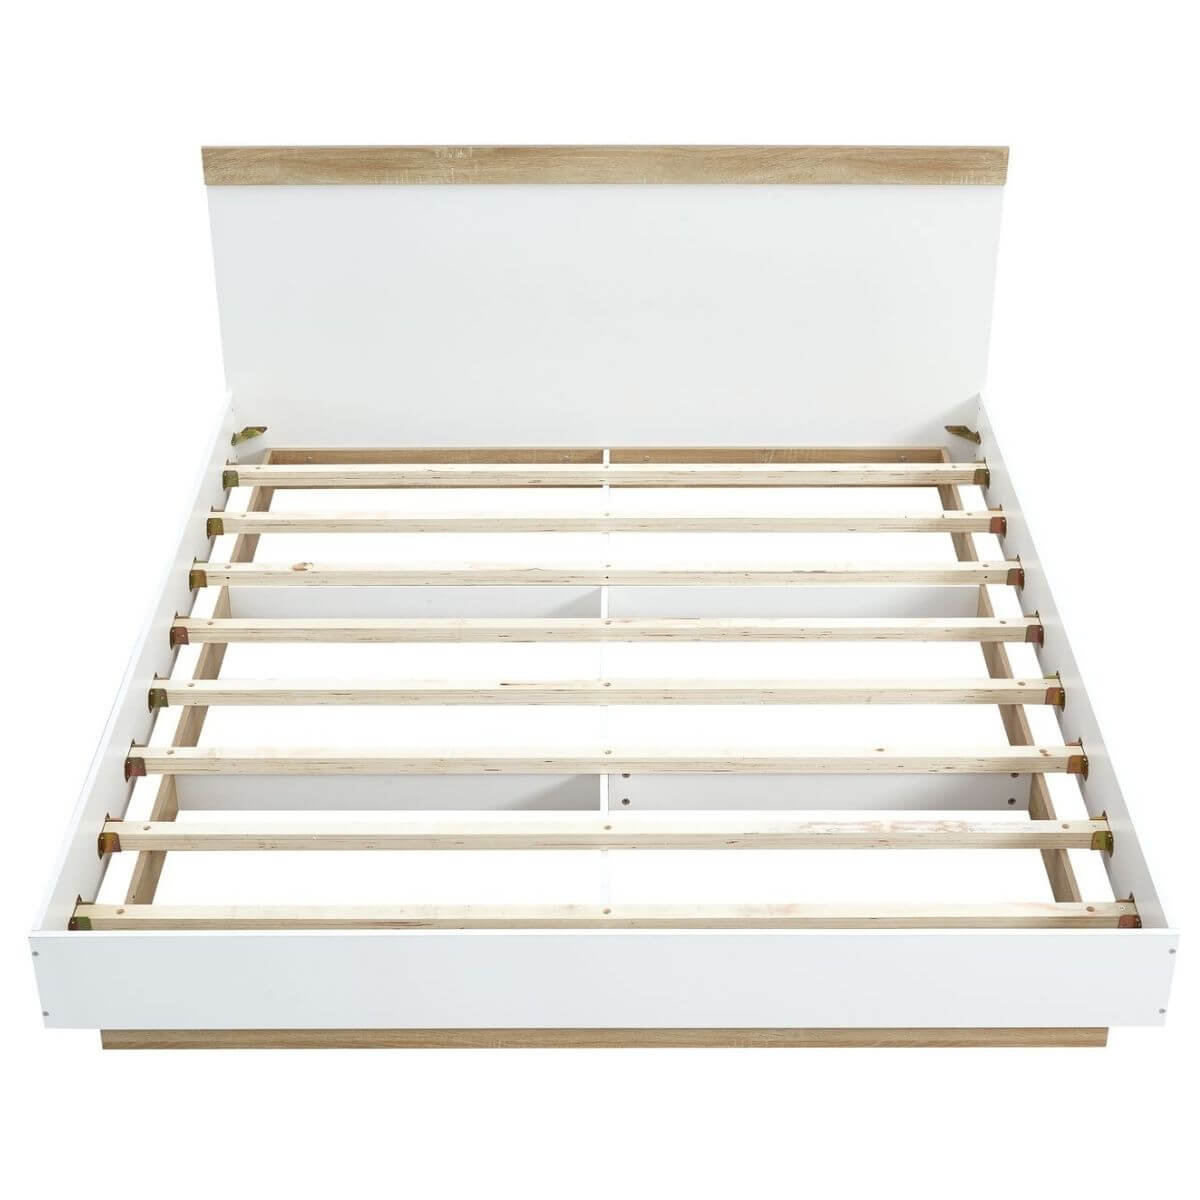 Aiden Industrial Contemporary White Oak Bed Frame - Double